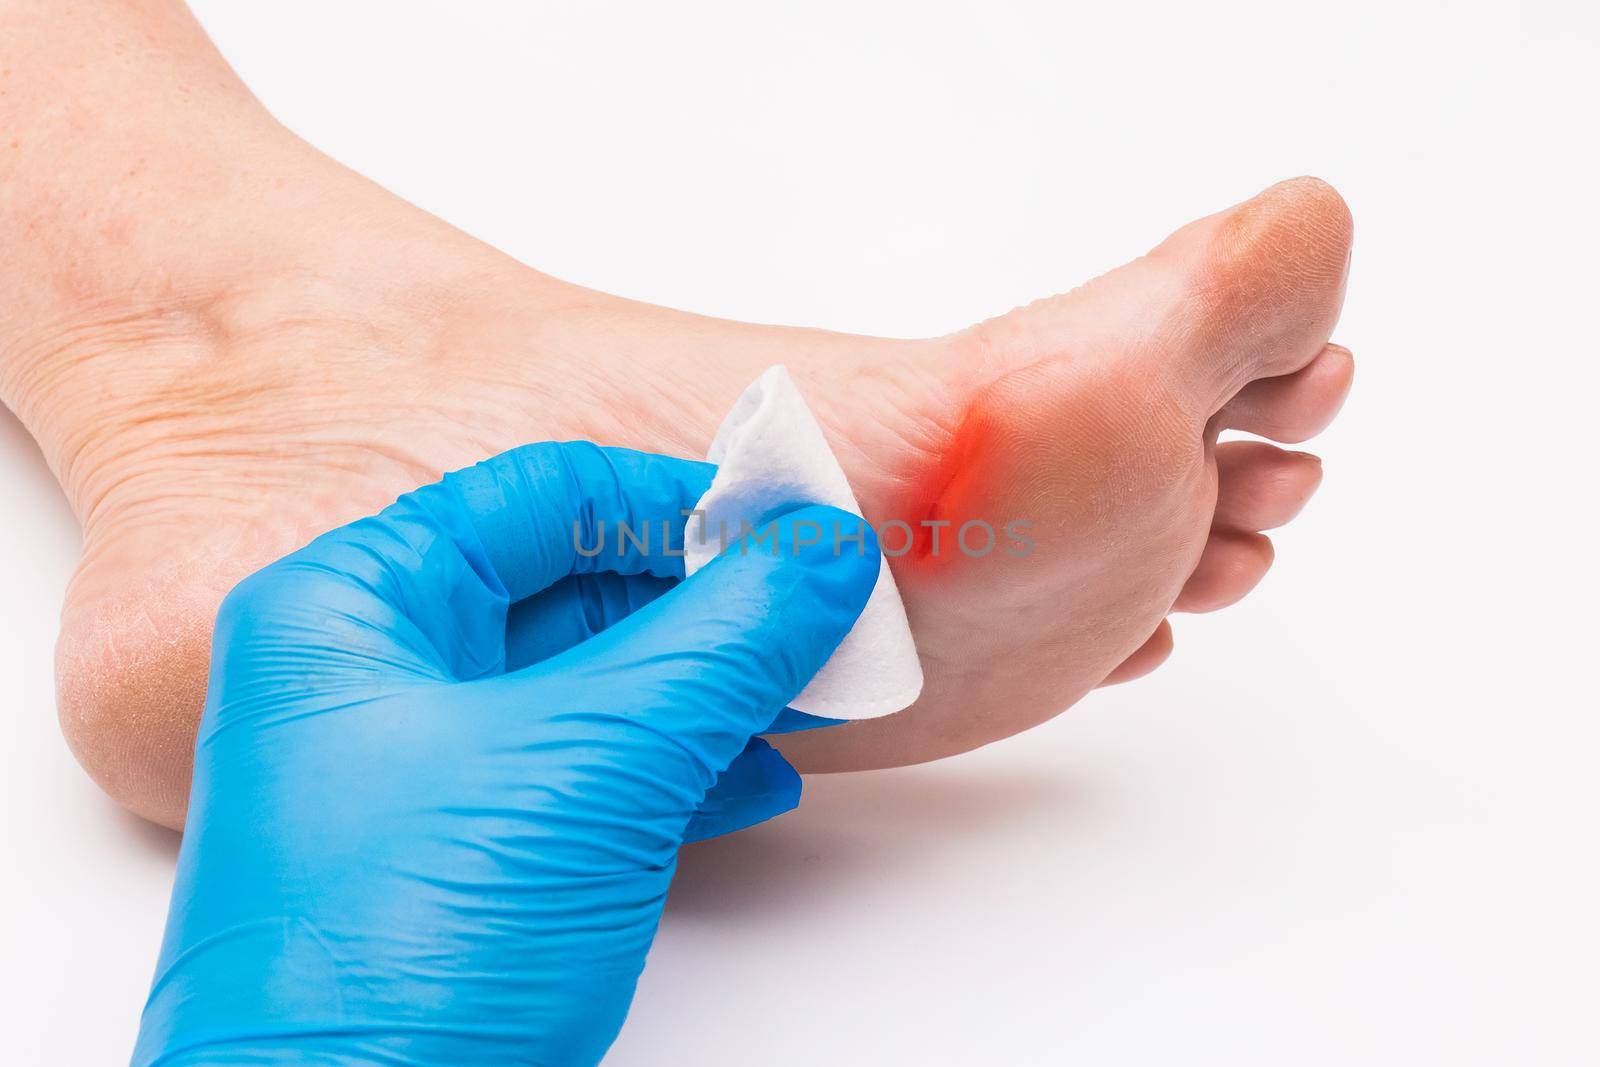 Doctor's hand in a protective medical glove applies a cotton pad to the wound on the foot, woman's leg on a white background, close-up.